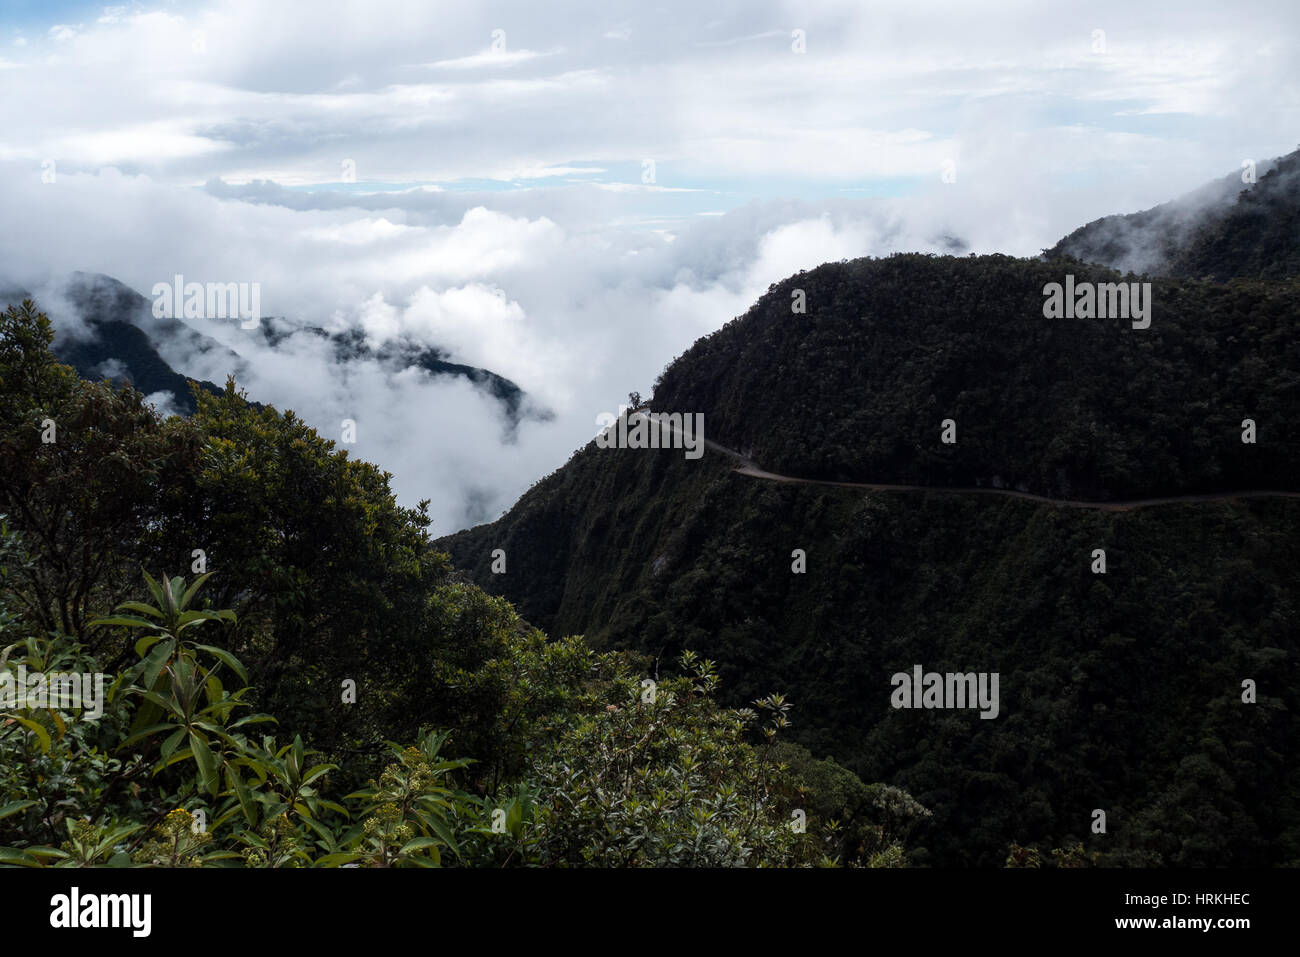 The The North Yungas Road is a road leading from La Paz to Coroico, 56 kilometres (35 mi) northeast of La Paz in the Yungas region of Bolivia. In 1995 Stock Photo